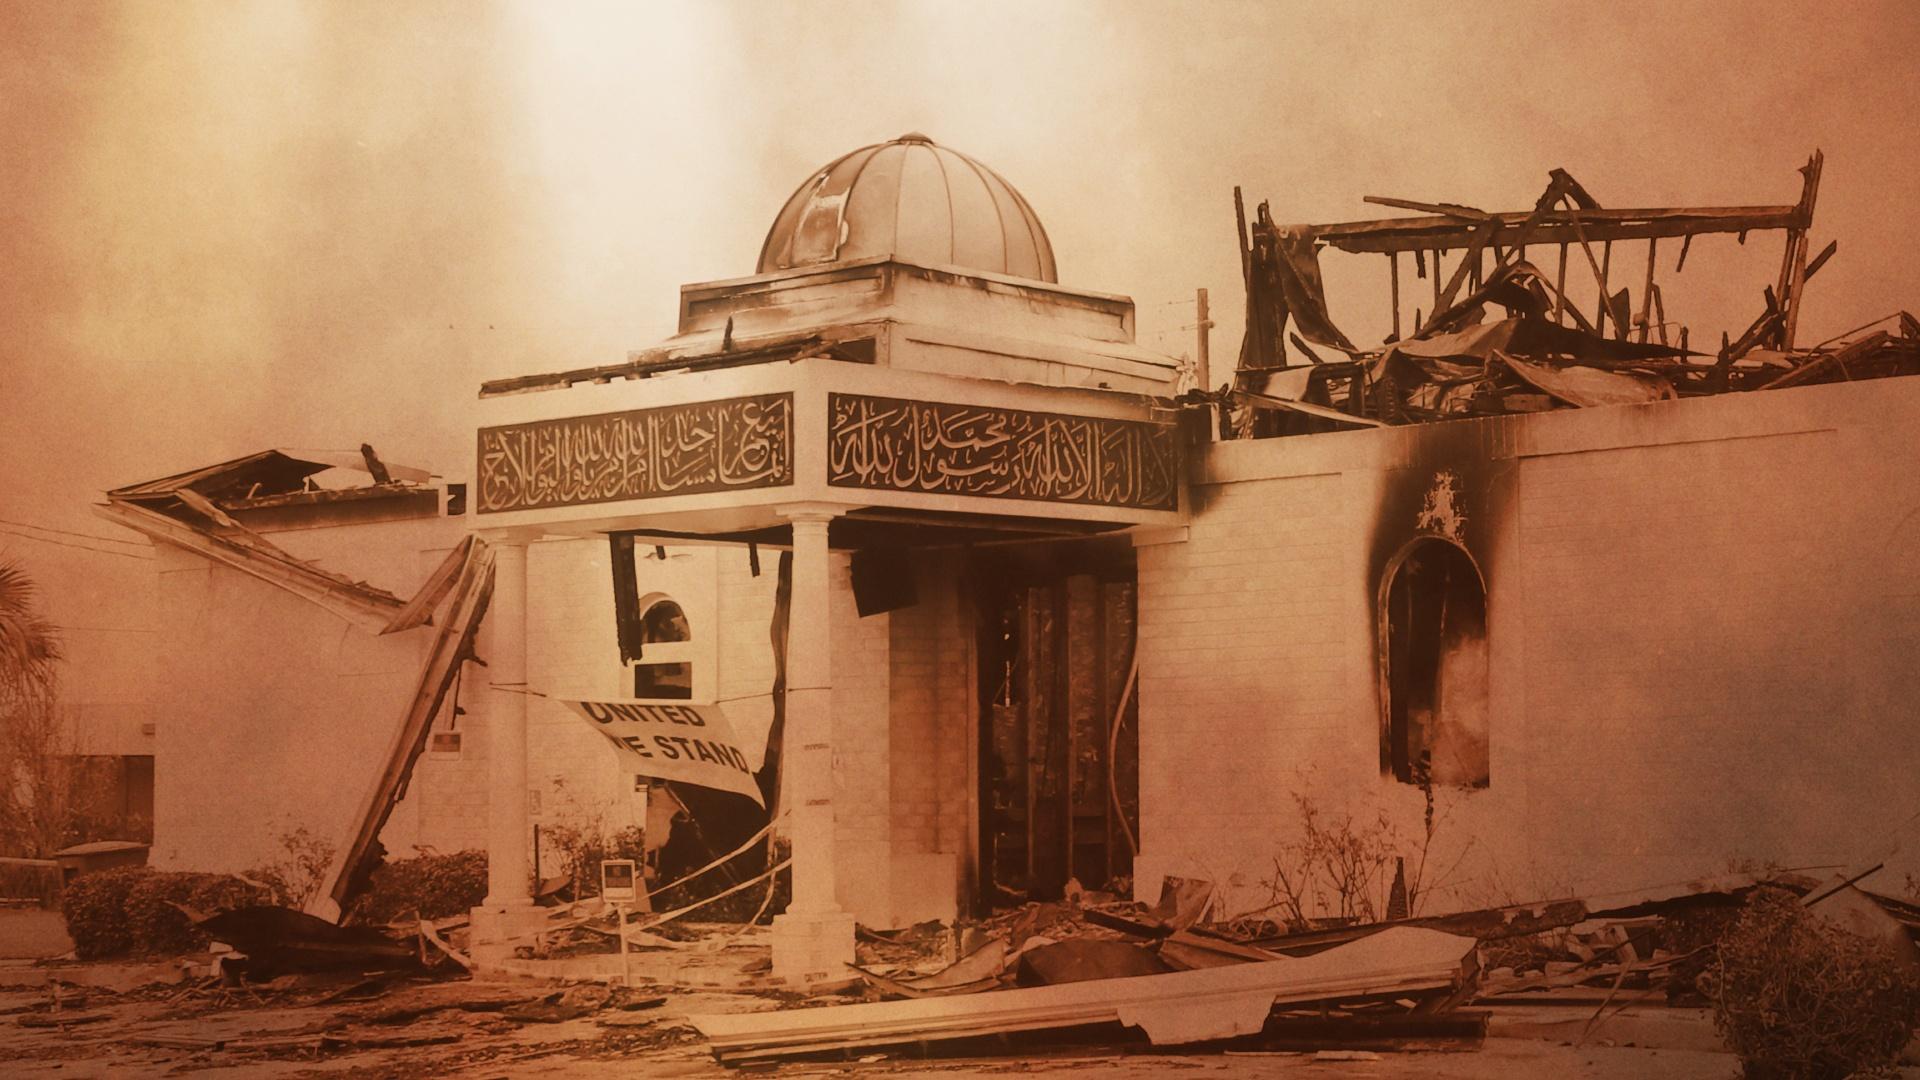 A sepia toned image of a burned down mosque.